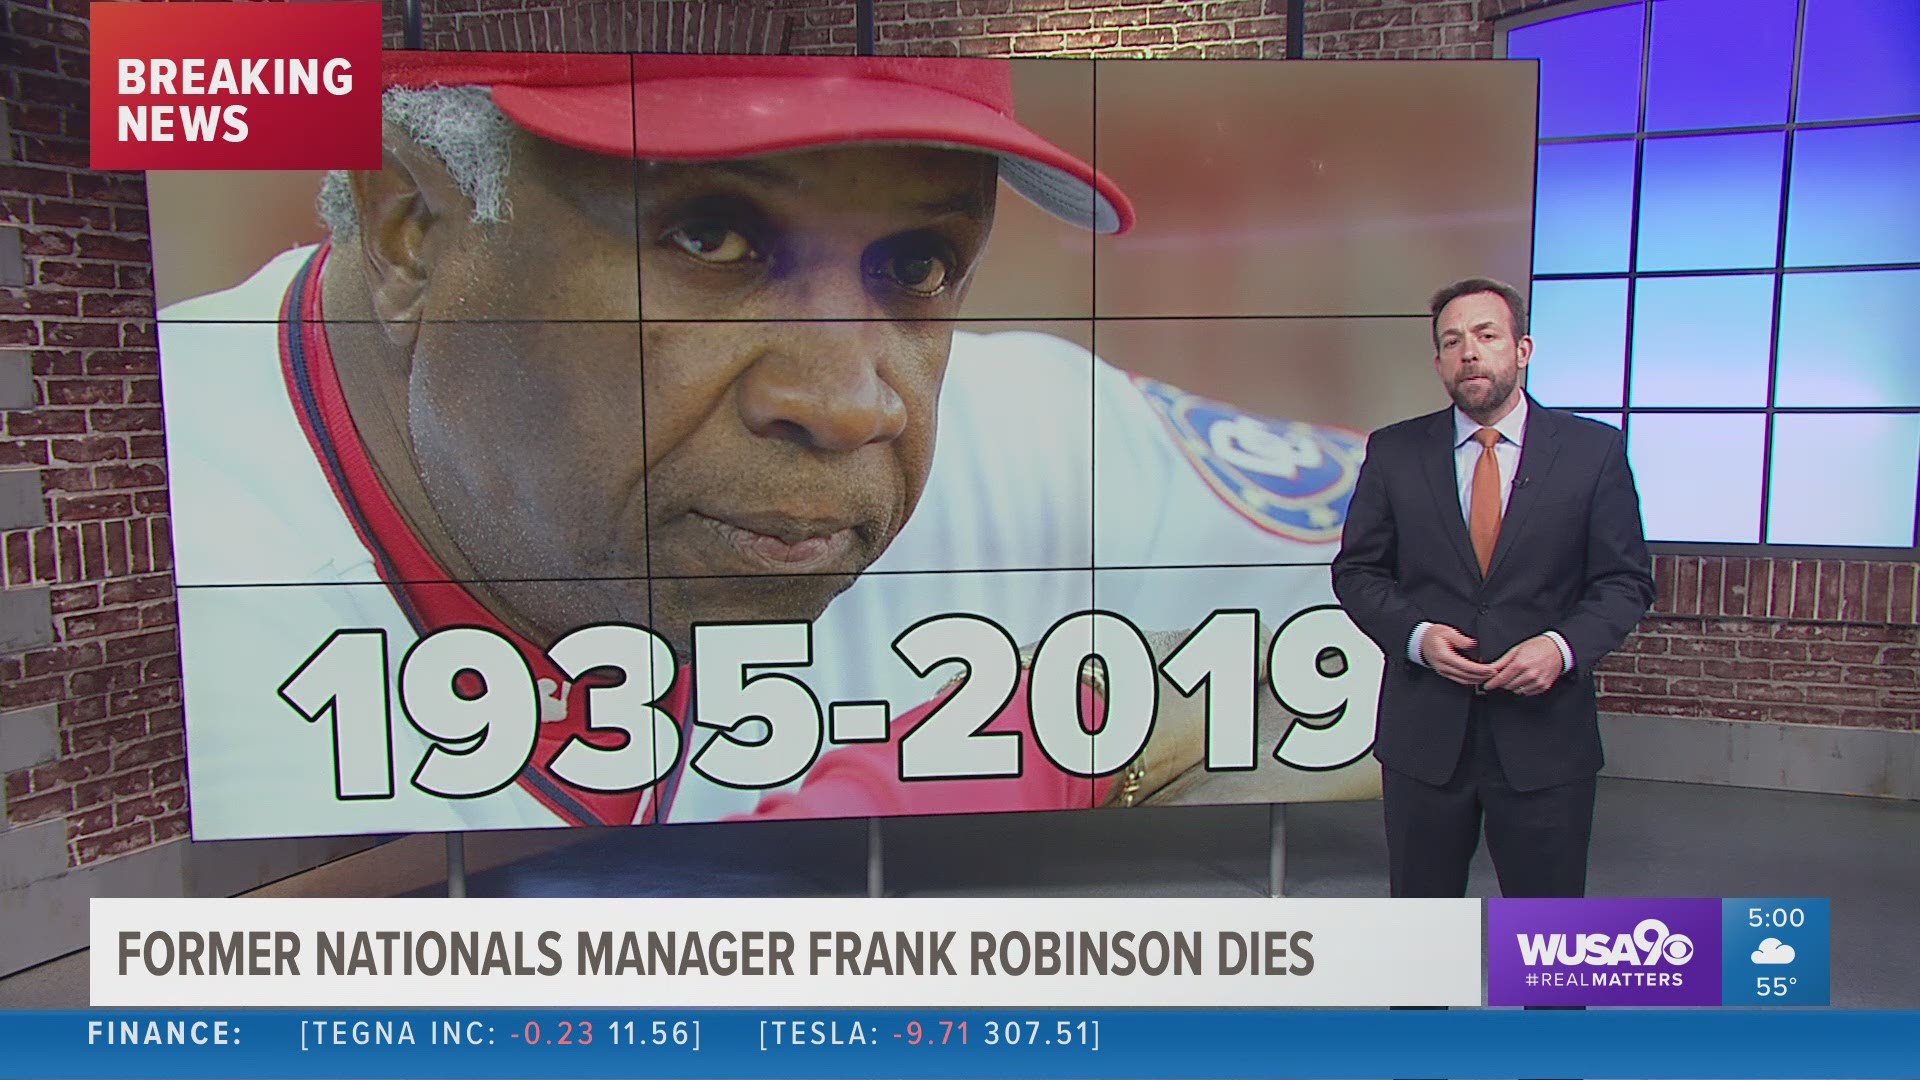 Baseball Hall of Famer, and former Nationals manager, Frank Robinson died after a battle with bone cancer.